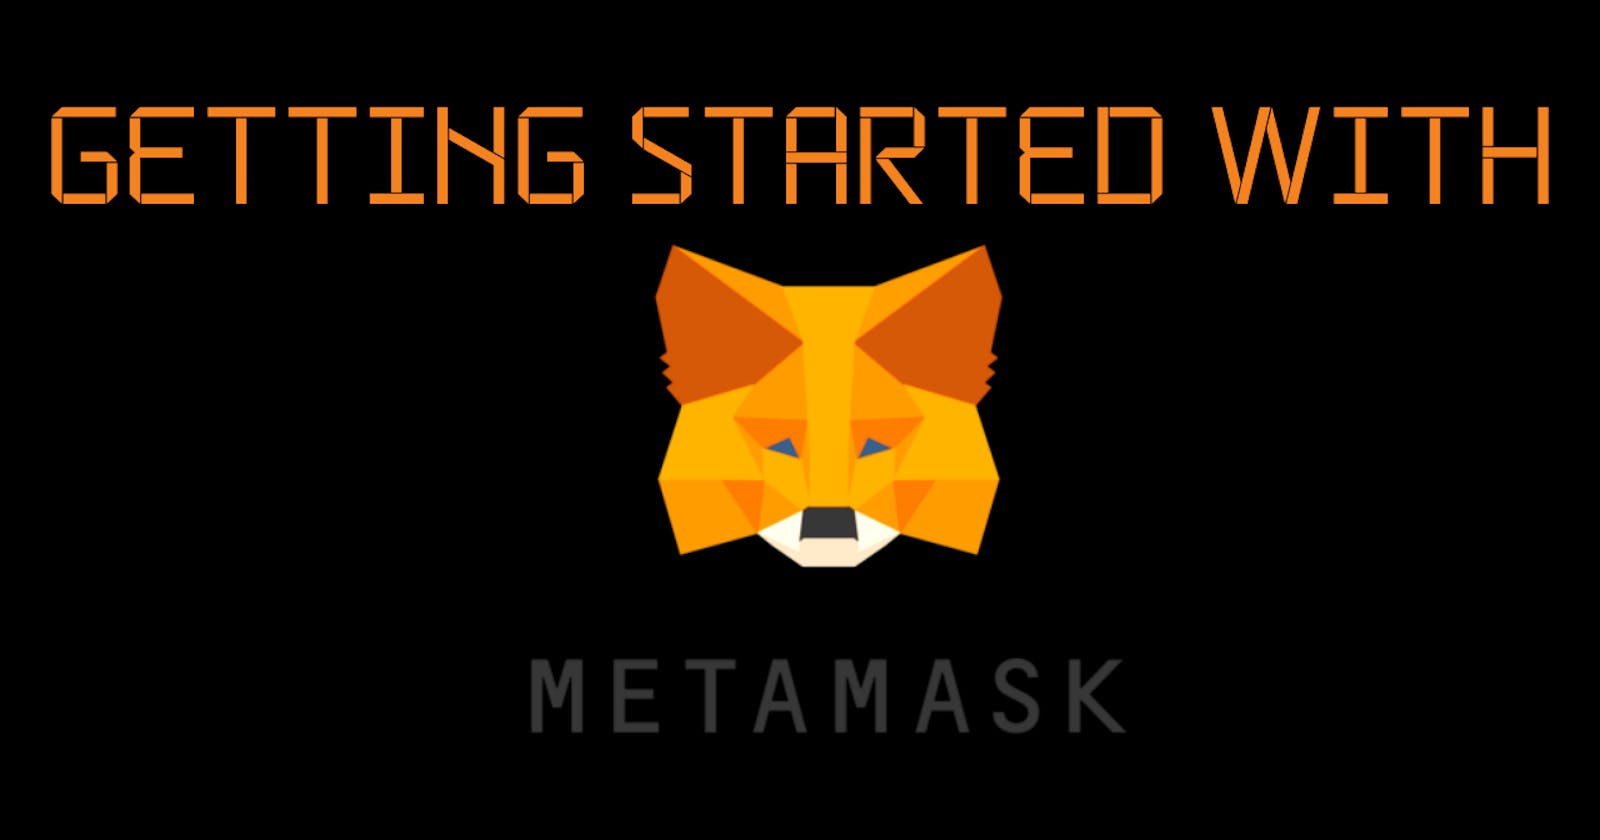 Getting Started With MetaMask